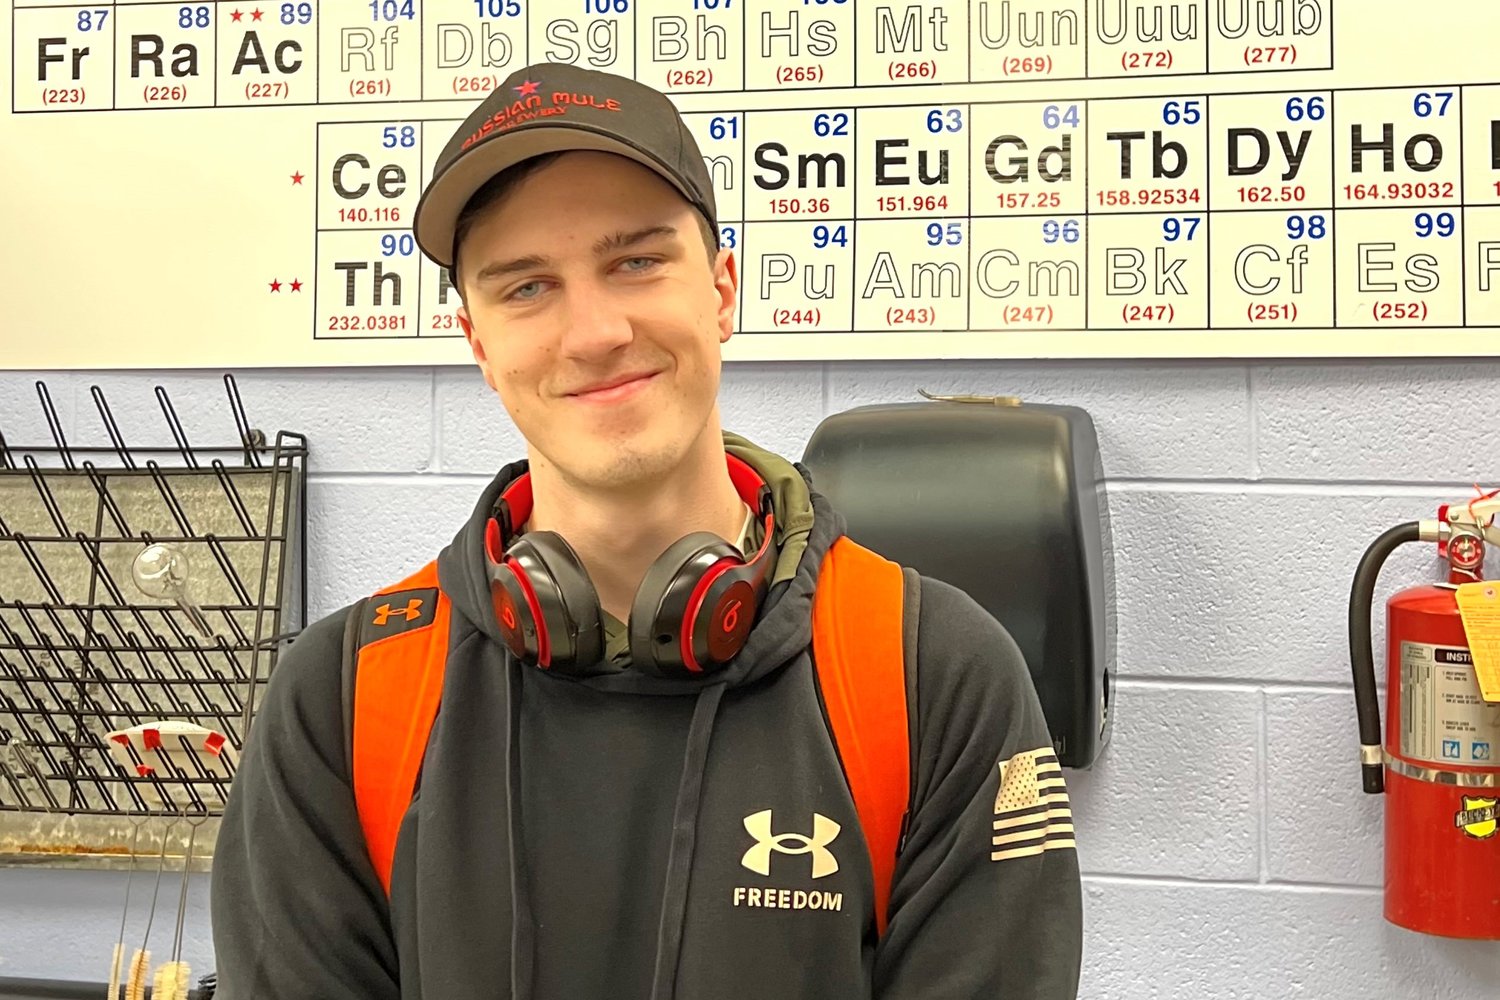 Reese Shelmandine was interested in SUNY Sullivan because of its environmental studies program, and he is taking some of the fundamental classes before he goes for a four-year degree.